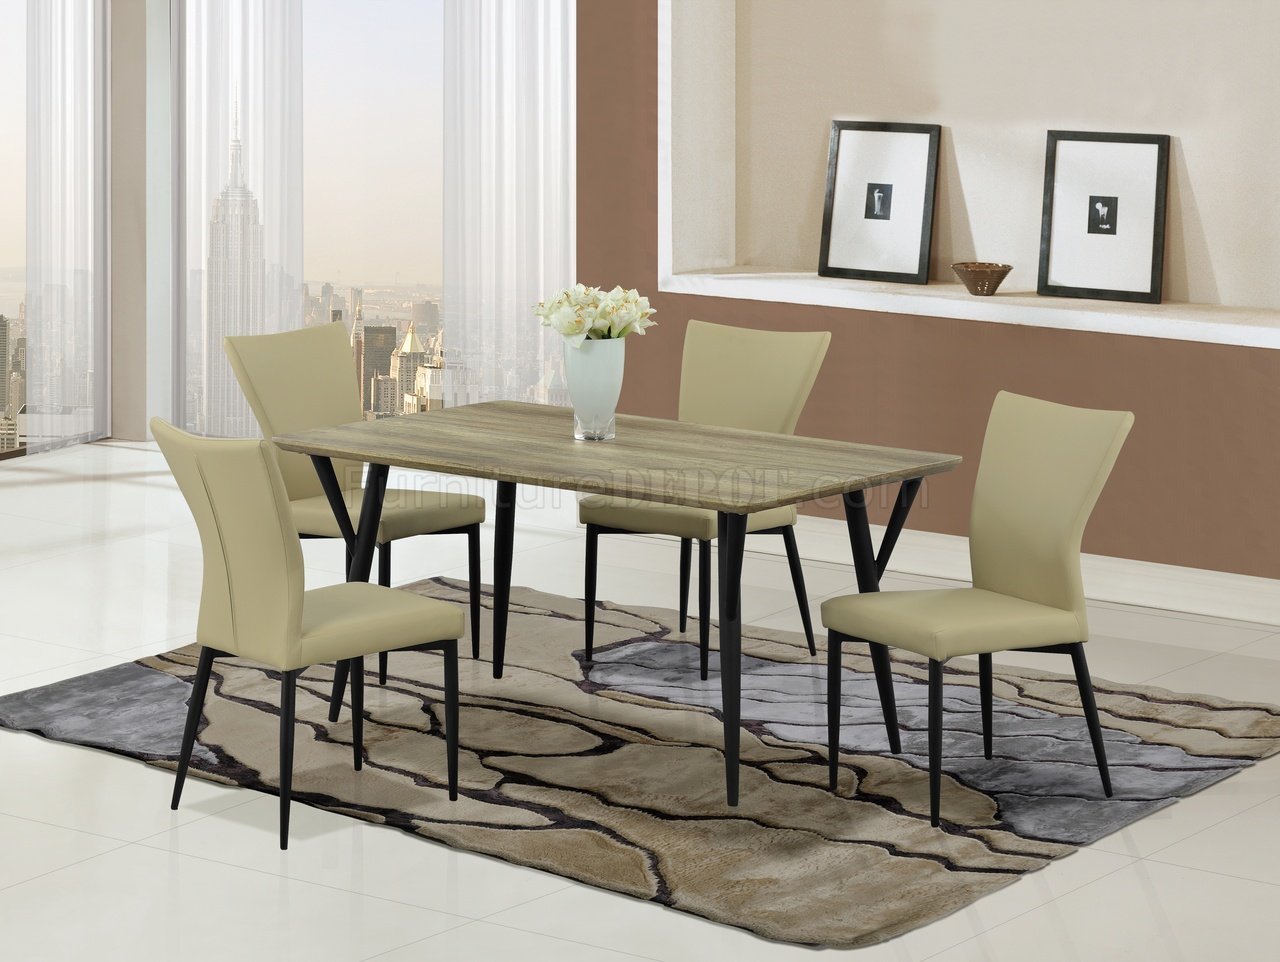 D794DT Dining Set 5Pc in Khaki & Black by Global w/D7772 Chairs